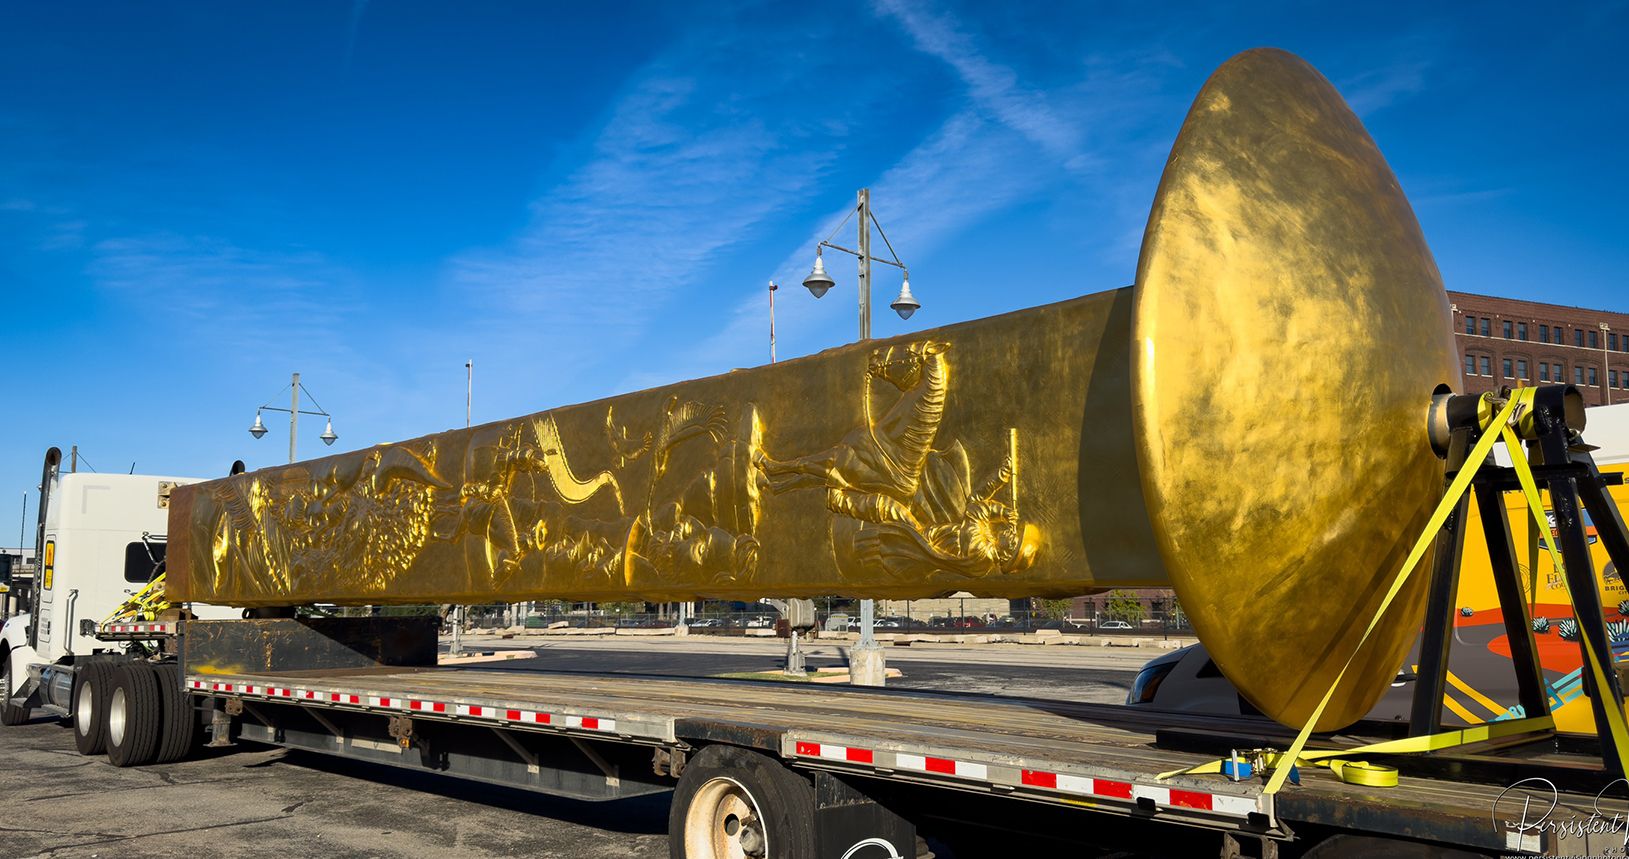 Don't Miss The 43' Golden Spike Monument As It Stops In Cheyenne!